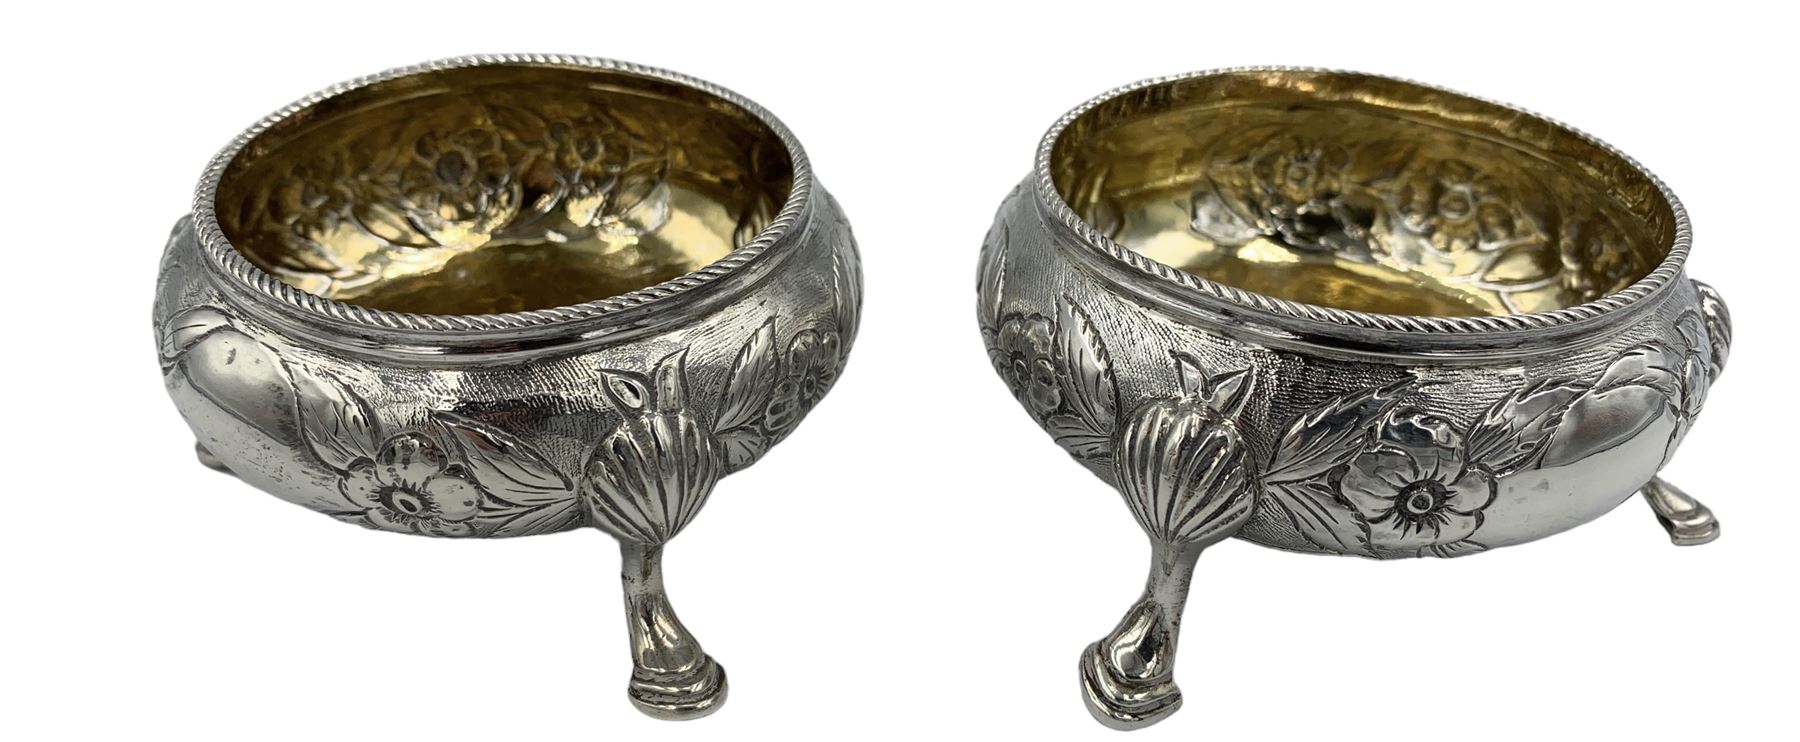 Pair of Victorian silver circular salts with gilded interiors - Image 2 of 3